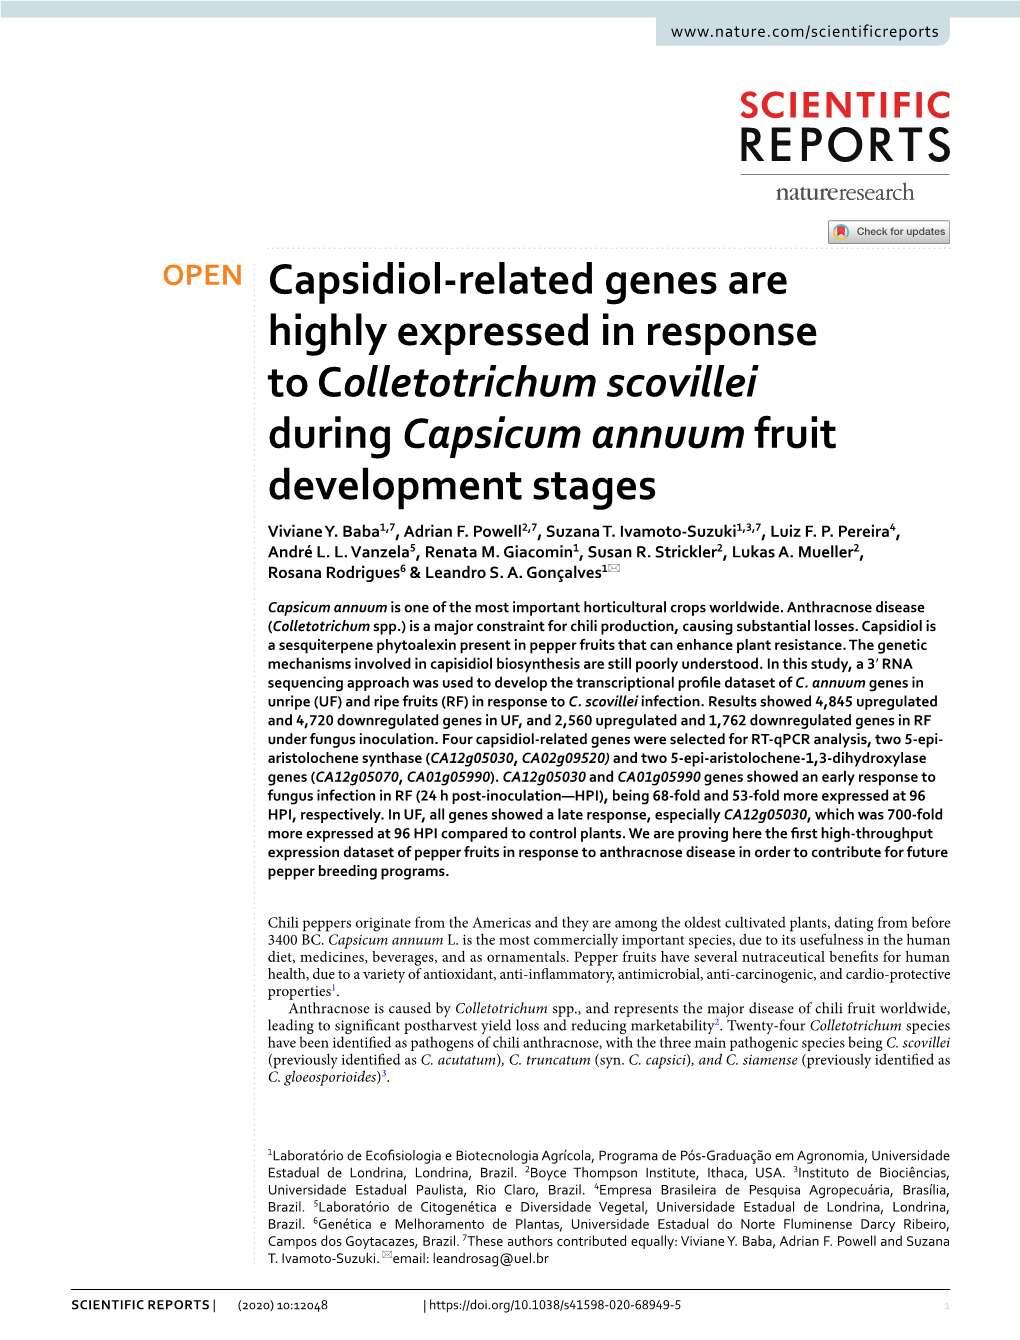 Capsidiol-Related Genes Are Highly Expressed in Response to Colletotrichum Scovillei During Capsicum Annuum Fruit Development St